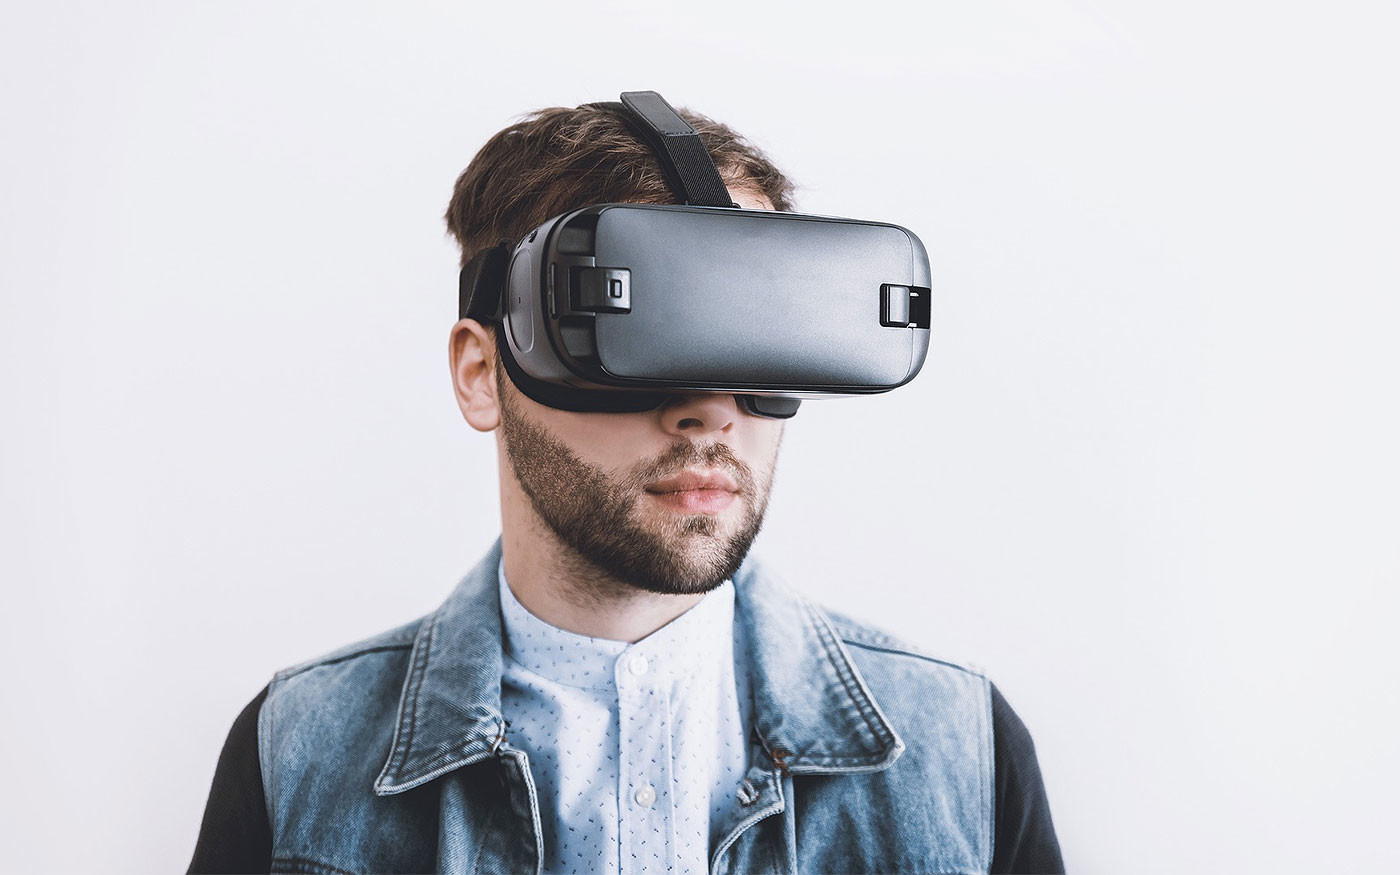 Standards for virtual reality glasses